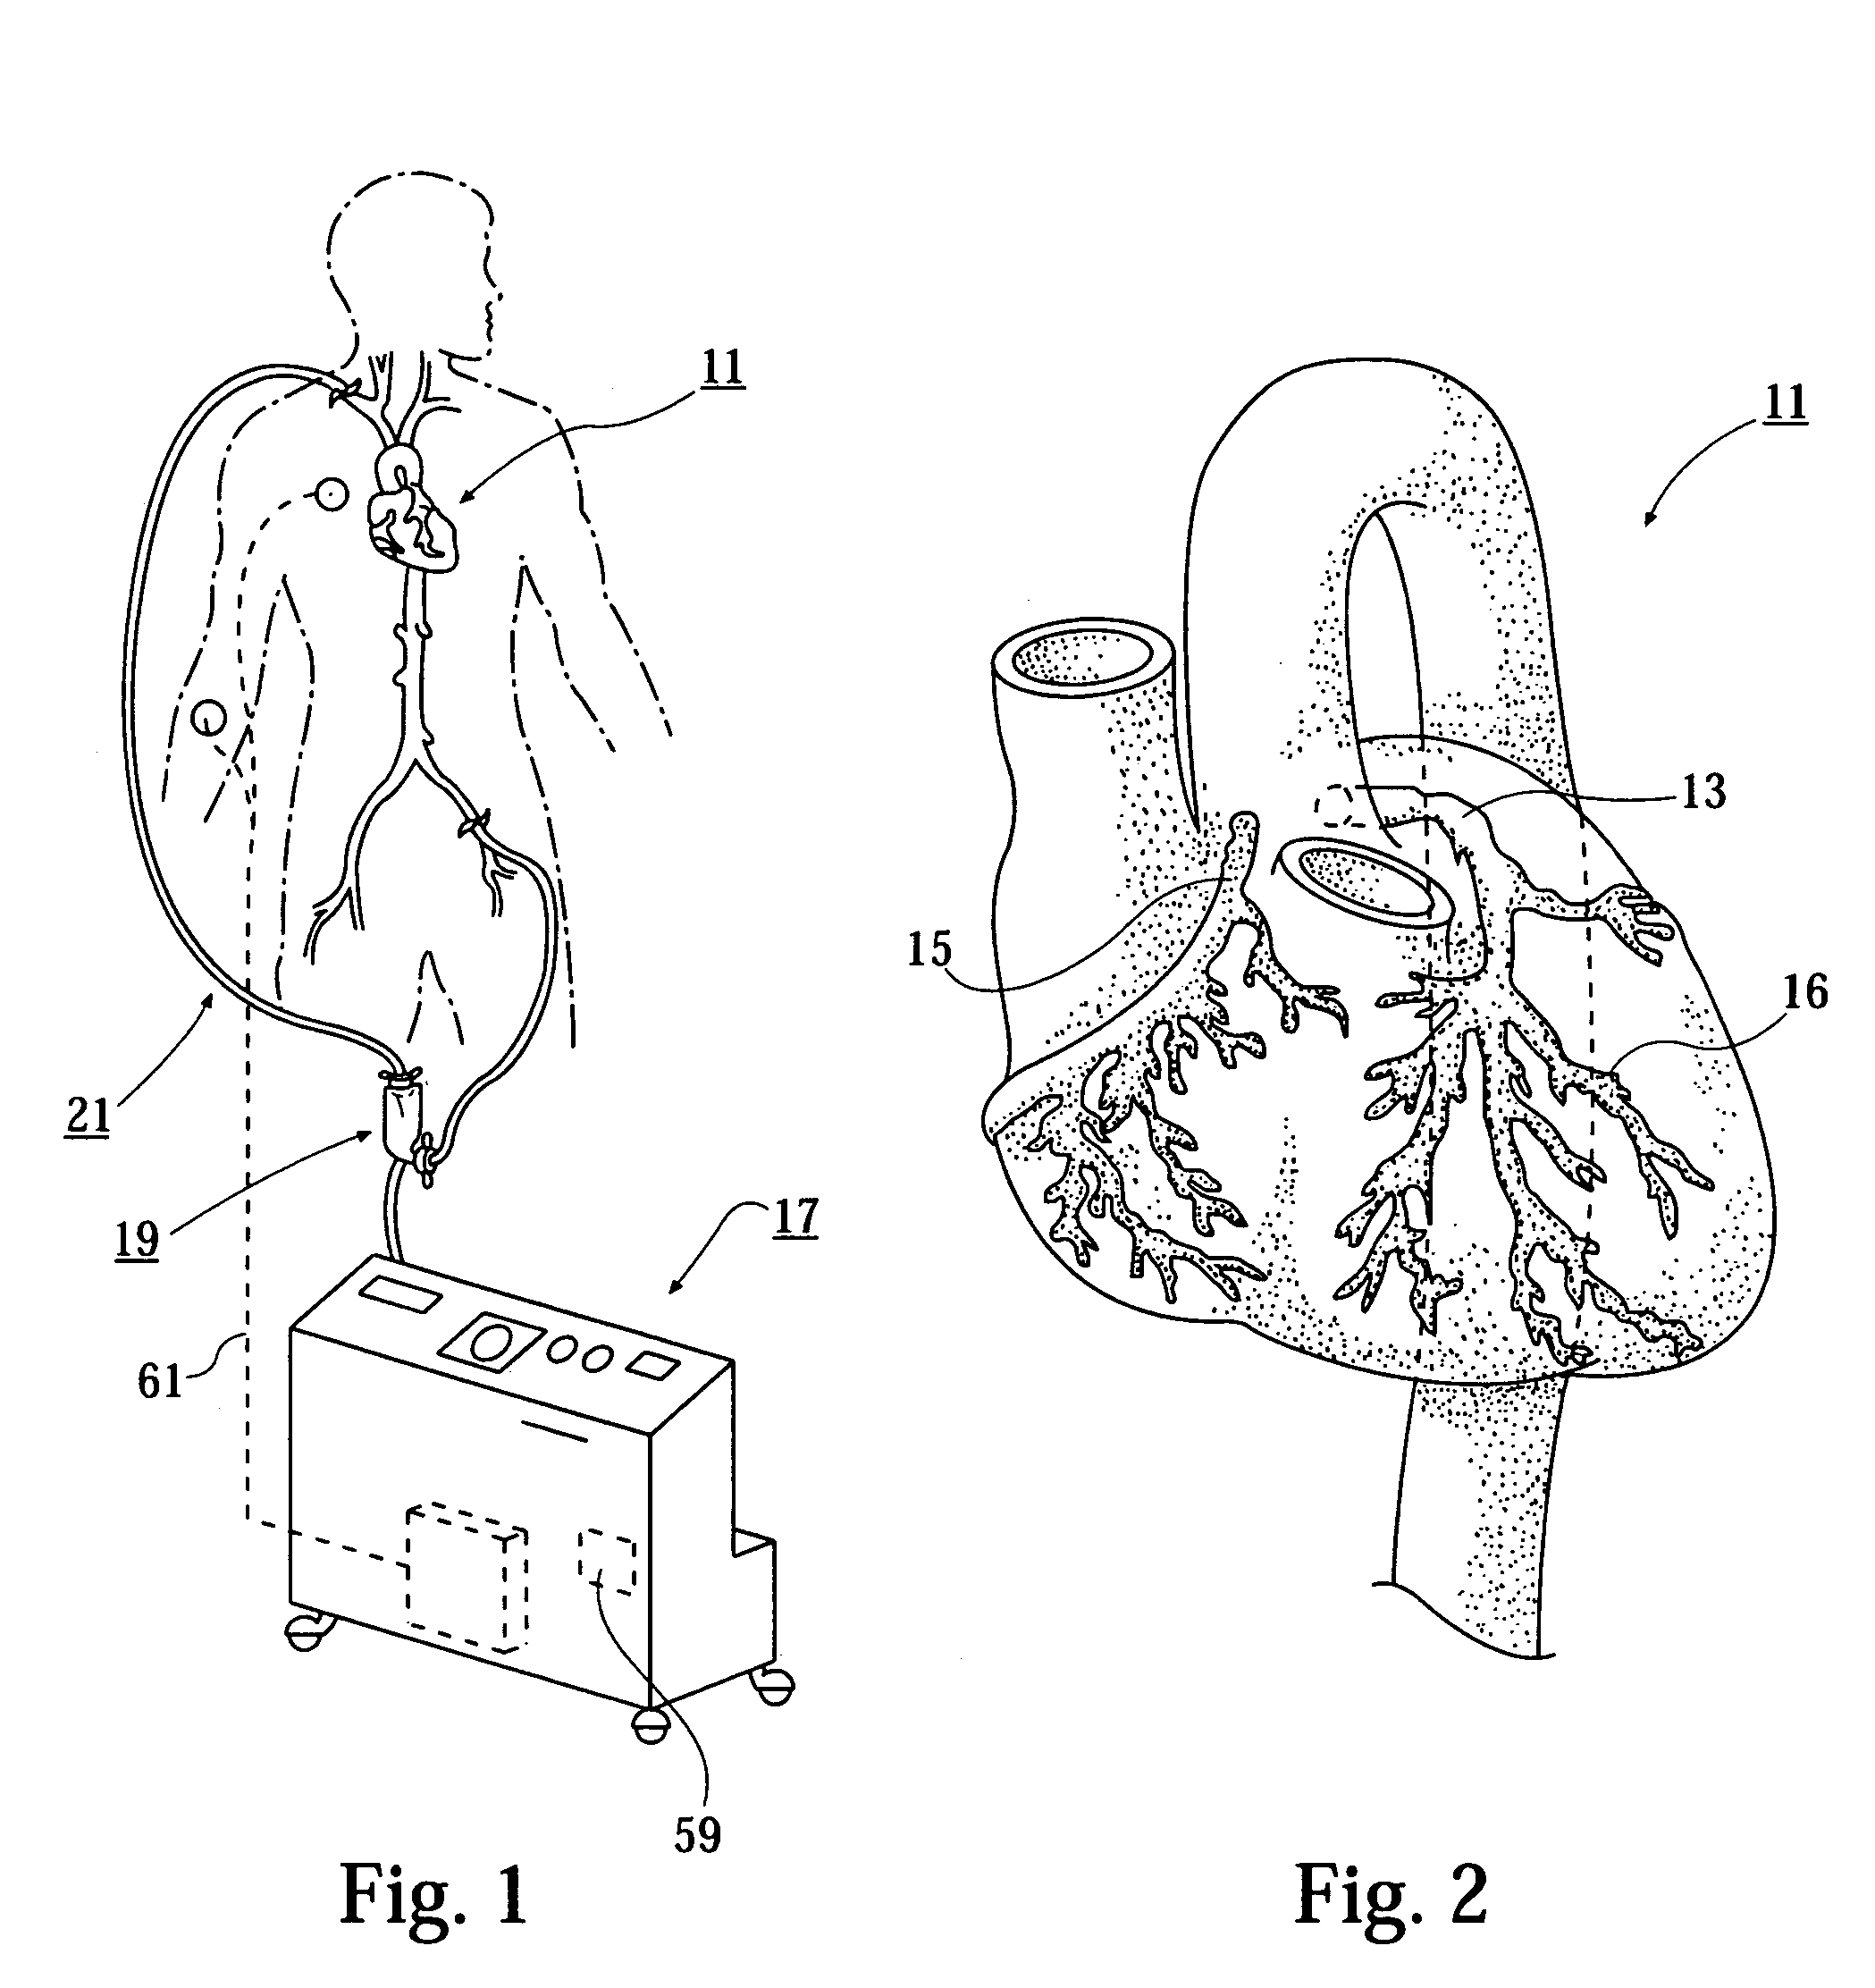 Minimally invasive ventricular assist technology and method